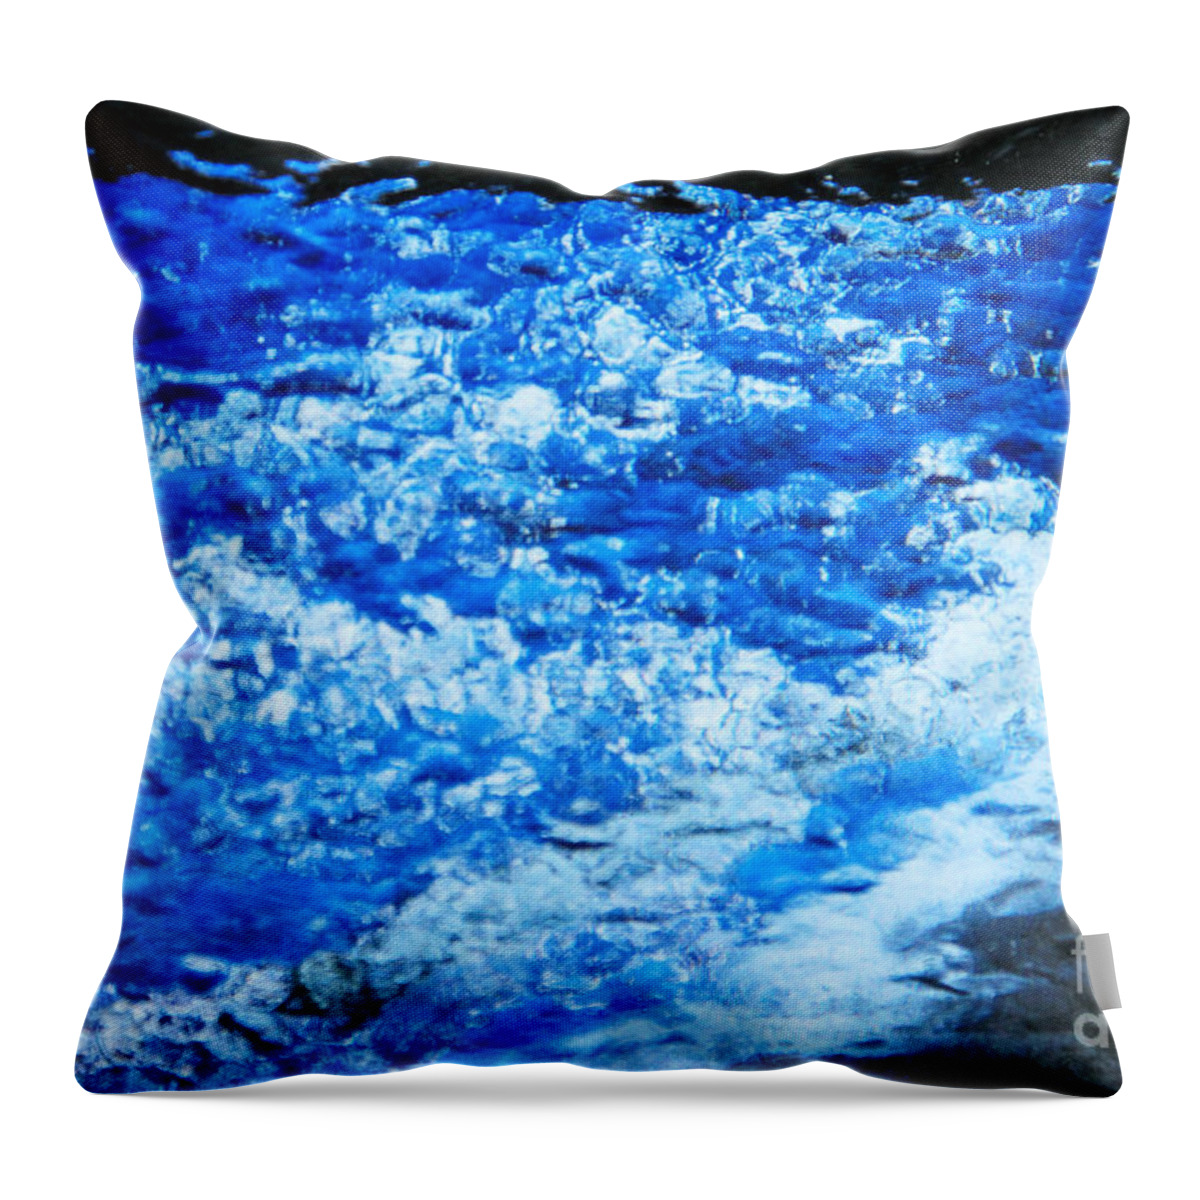 Winter Throw Pillow featuring the photograph Water Under Glass by Jeanette French